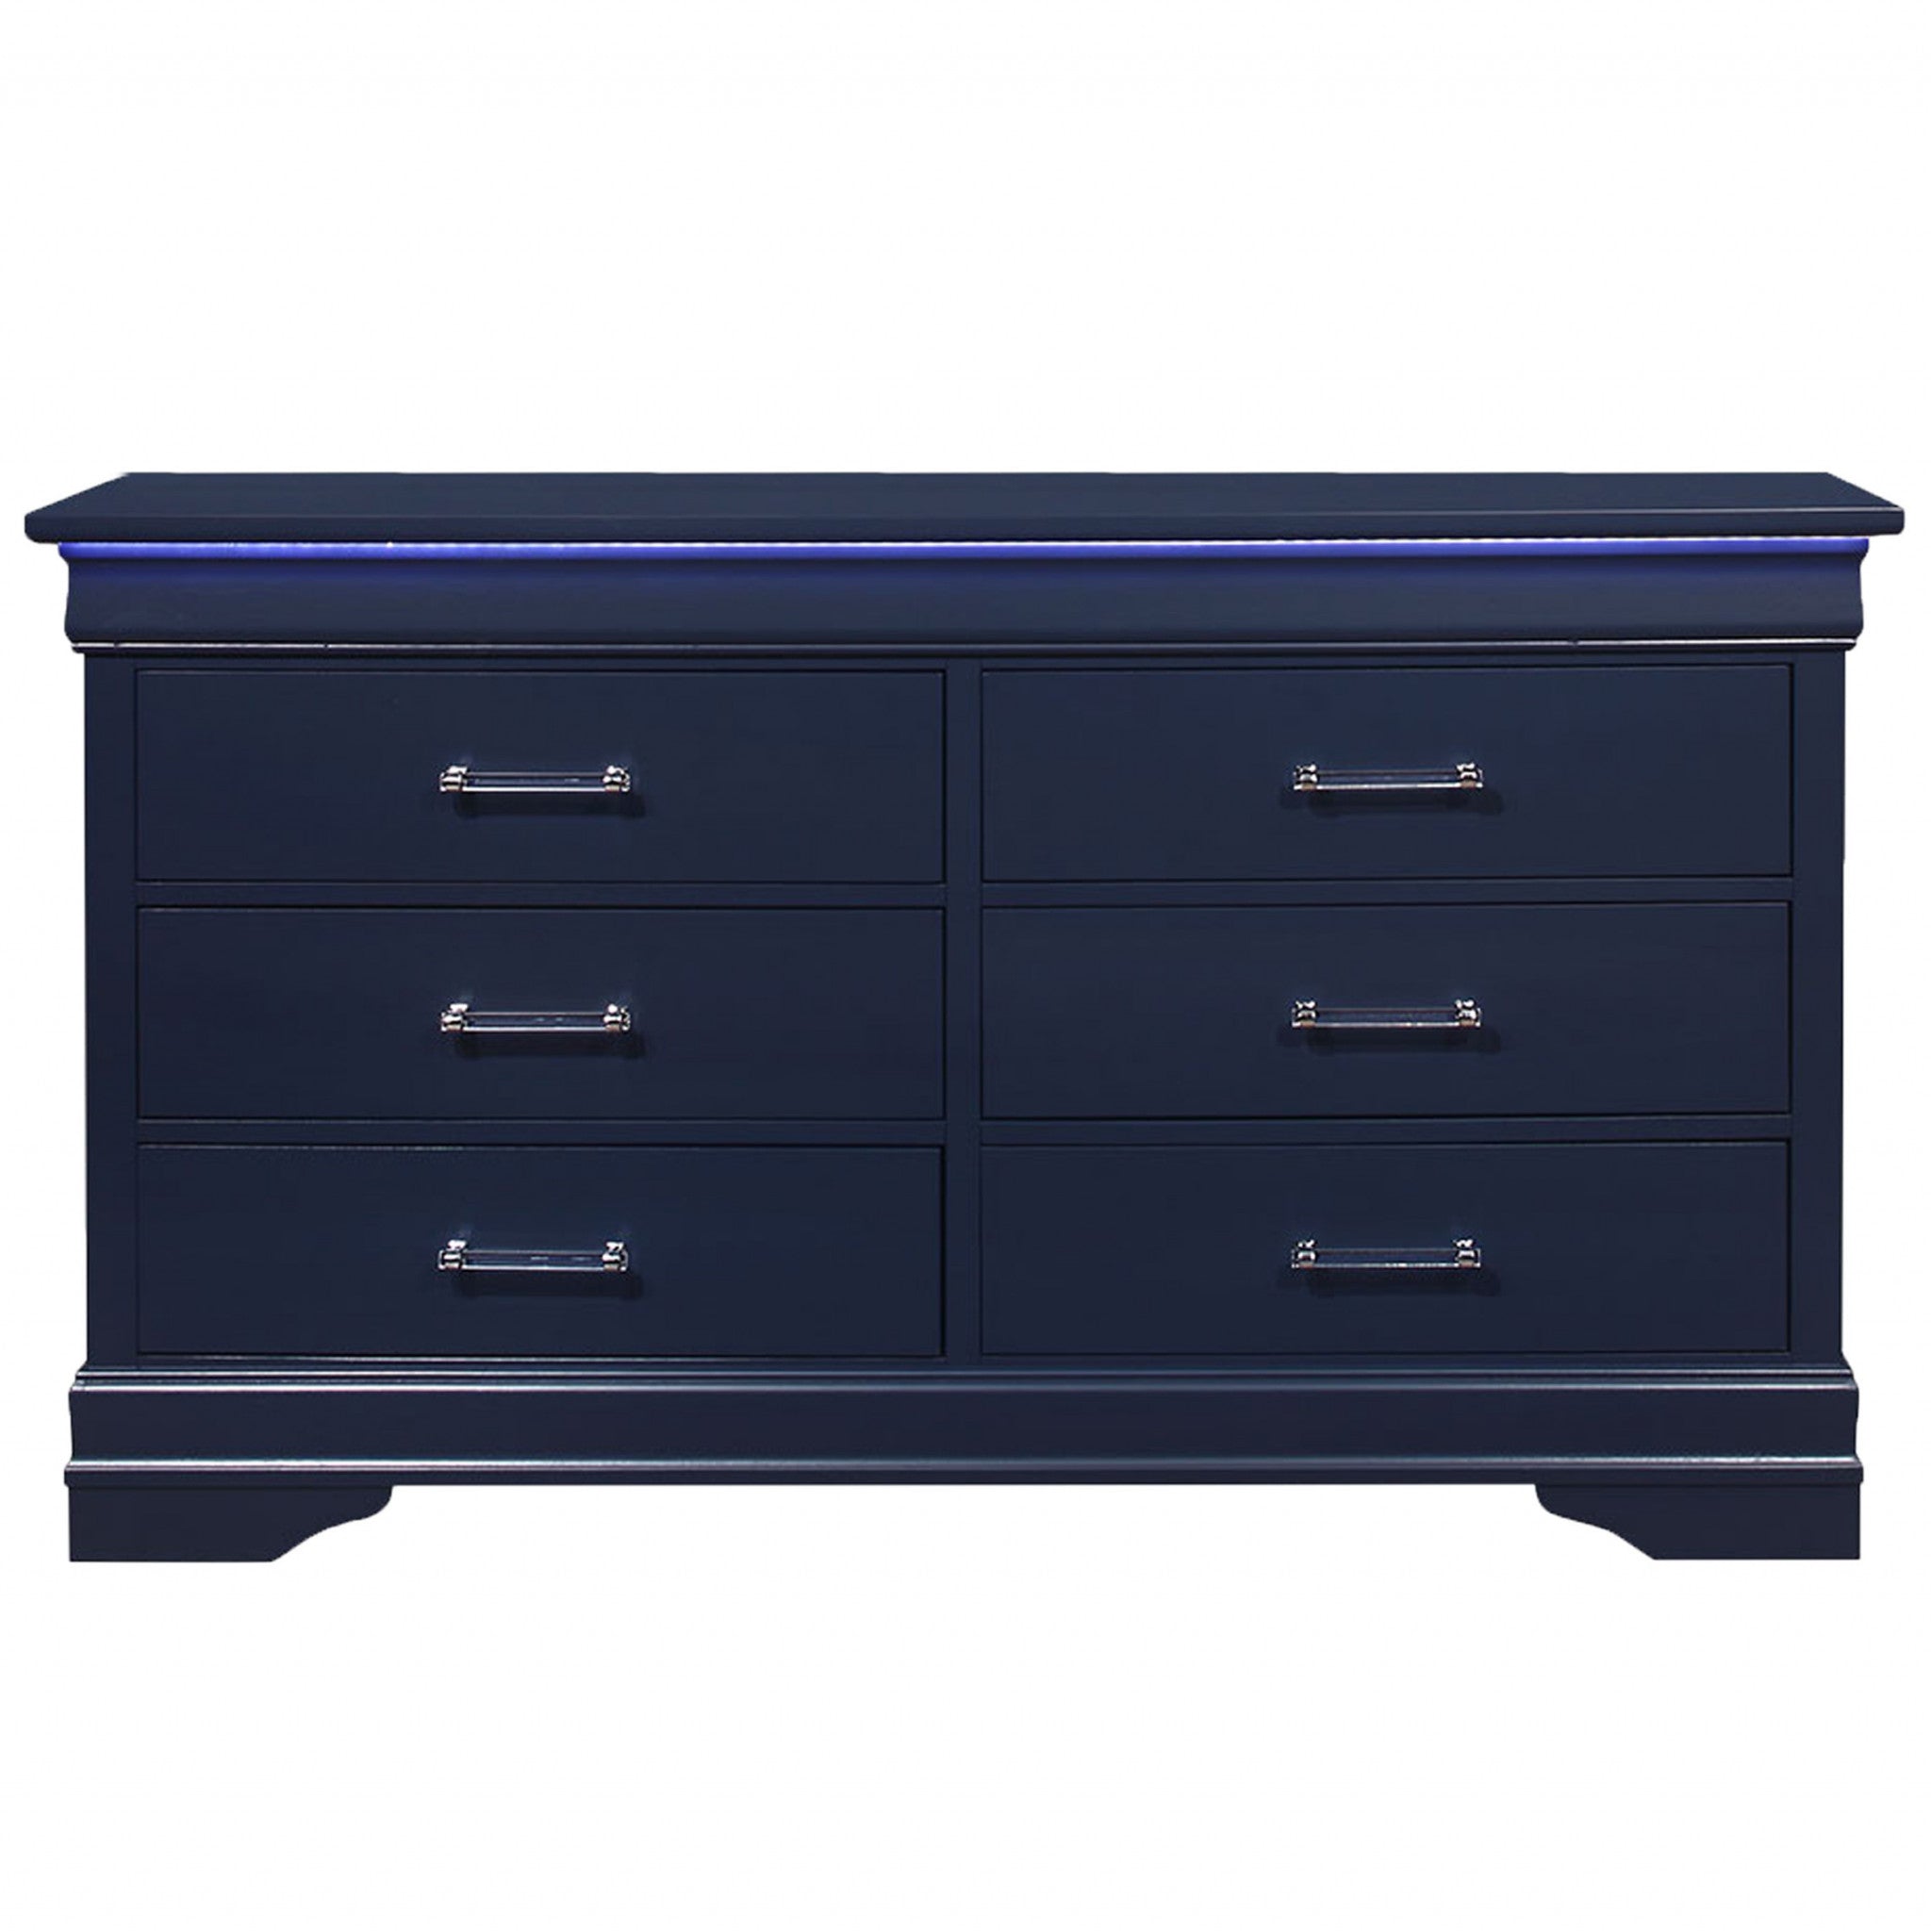 59" Blue Solid Wood Six Drawer Double Dresser with LED